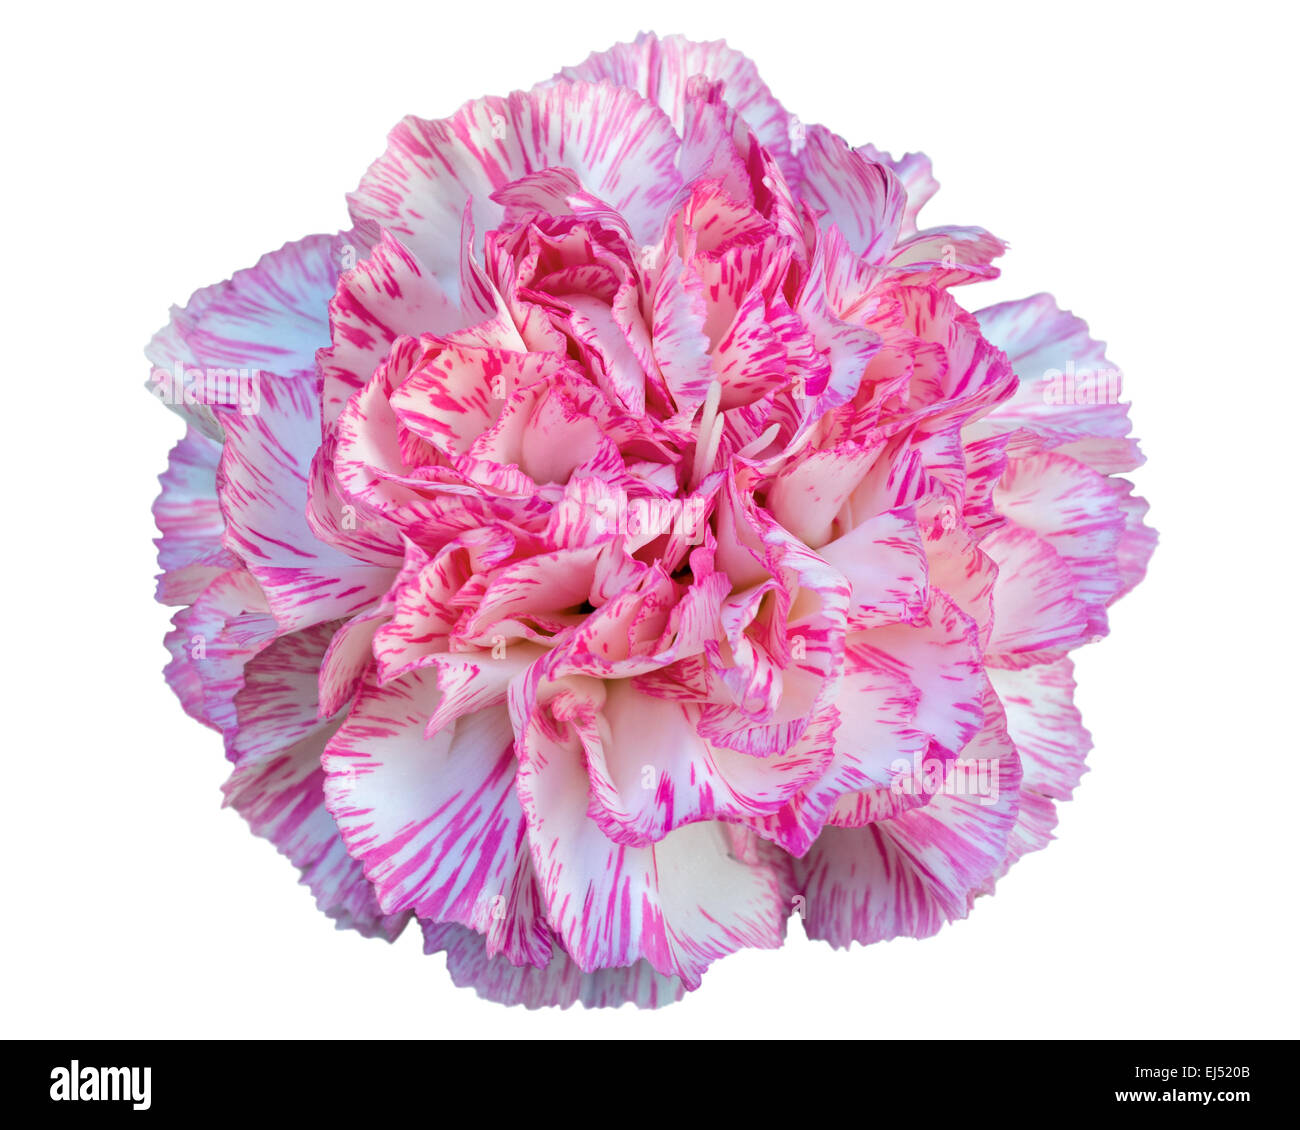 Beautiful Pink Carnation Flower Isolated On White Background Stock